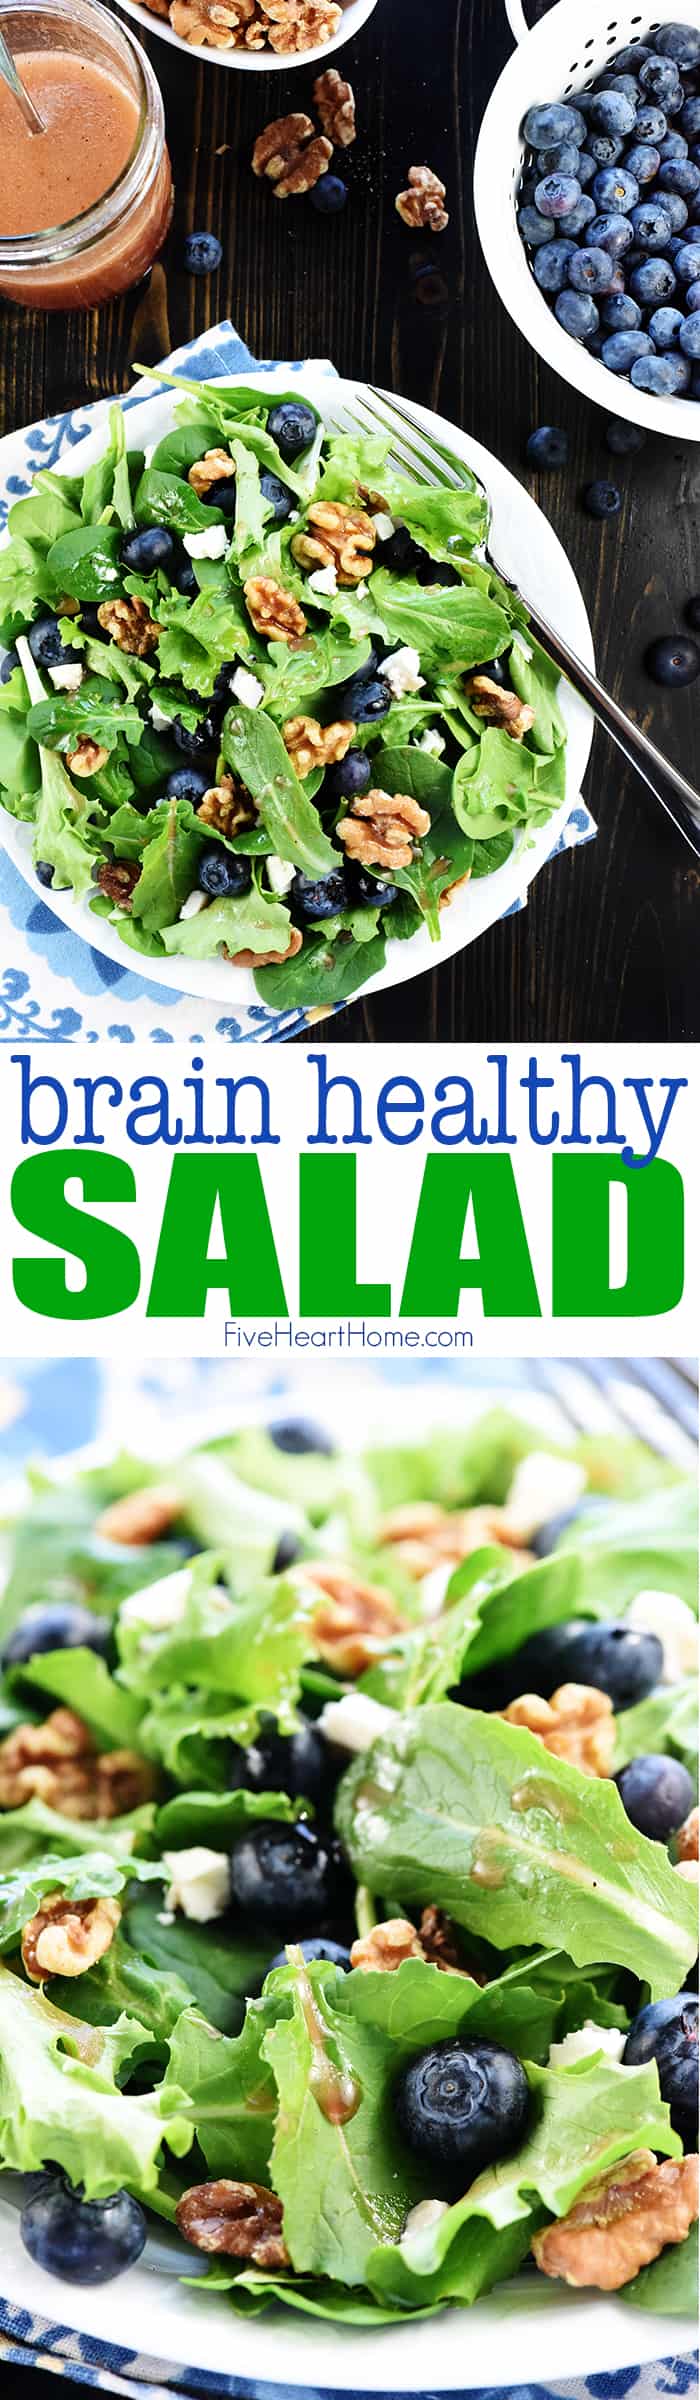 Brain Healthy Salad, two-photo collage with text.